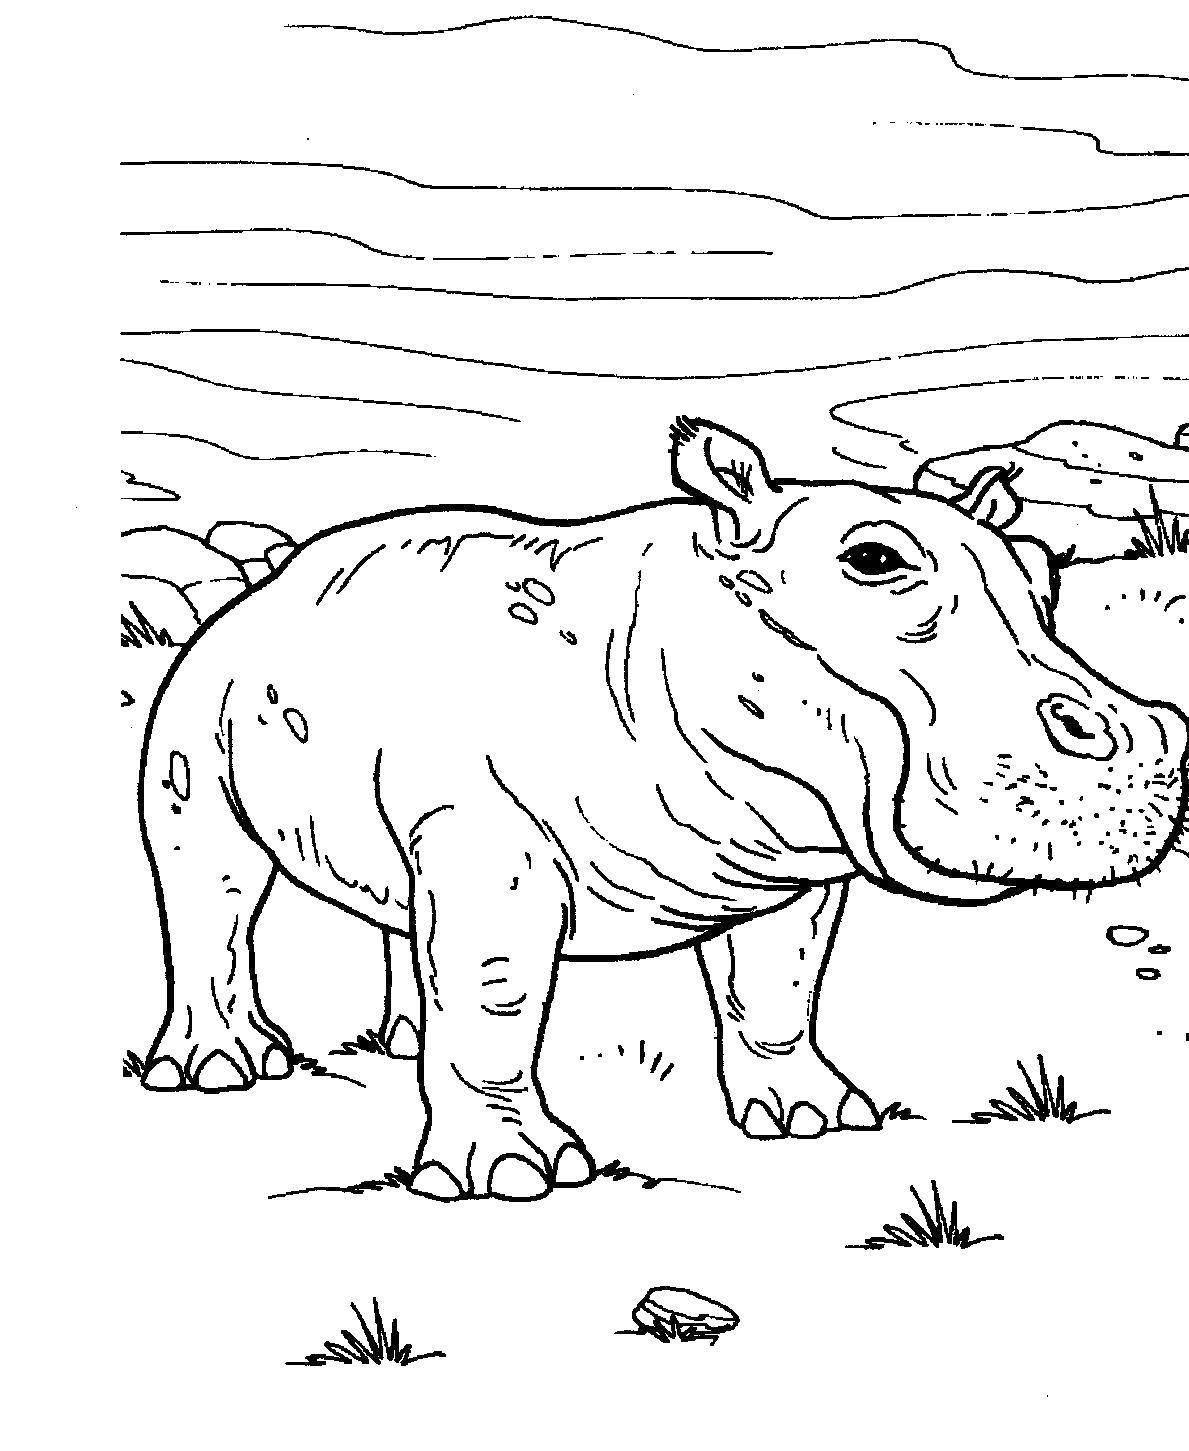 Coloring Hippo. Category Animals. Tags:  Animals, Hippo.